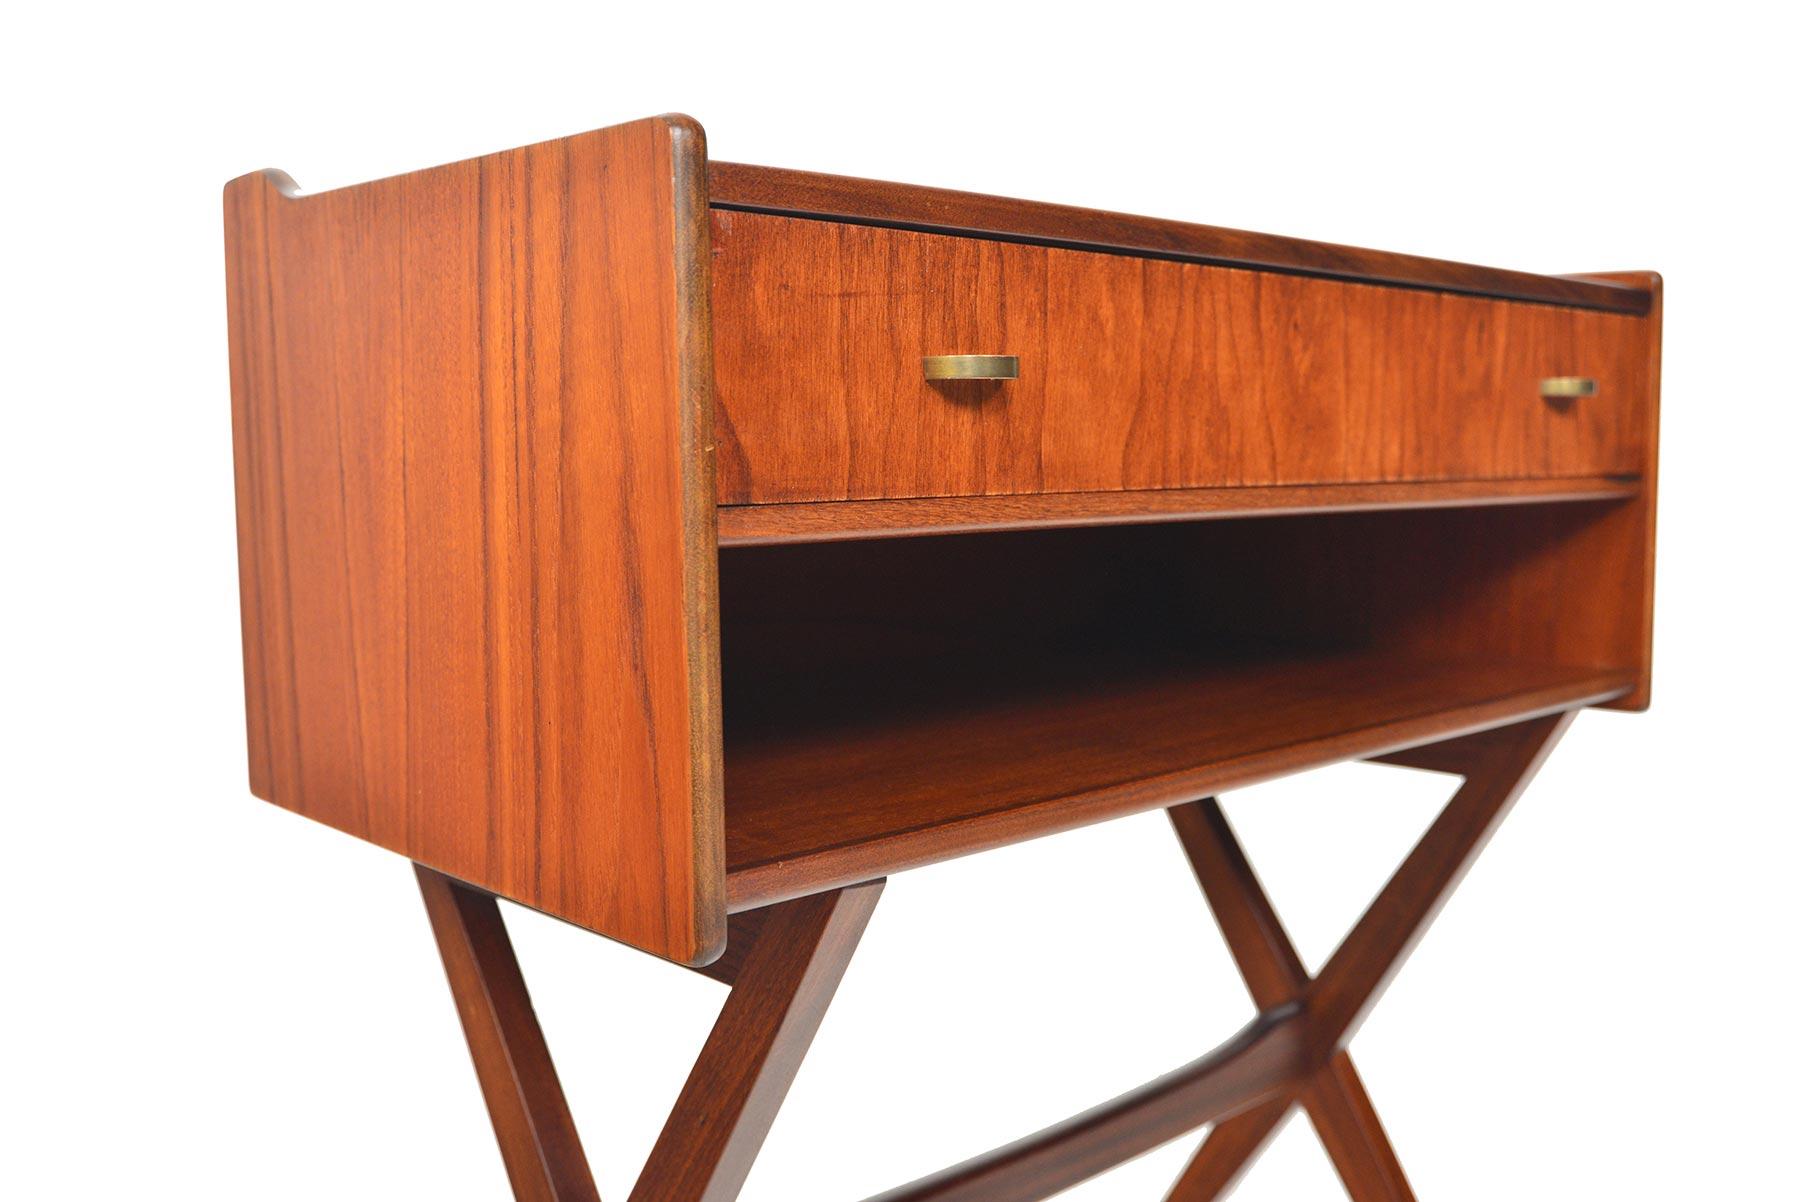 This Danish modern midcentury teak chest offers a stunning form! The chest holds a single drawer with brass half-moon pulls. A raised lip runs the sides. A phenomenal X-form base supports the piece. In excellent original condition.